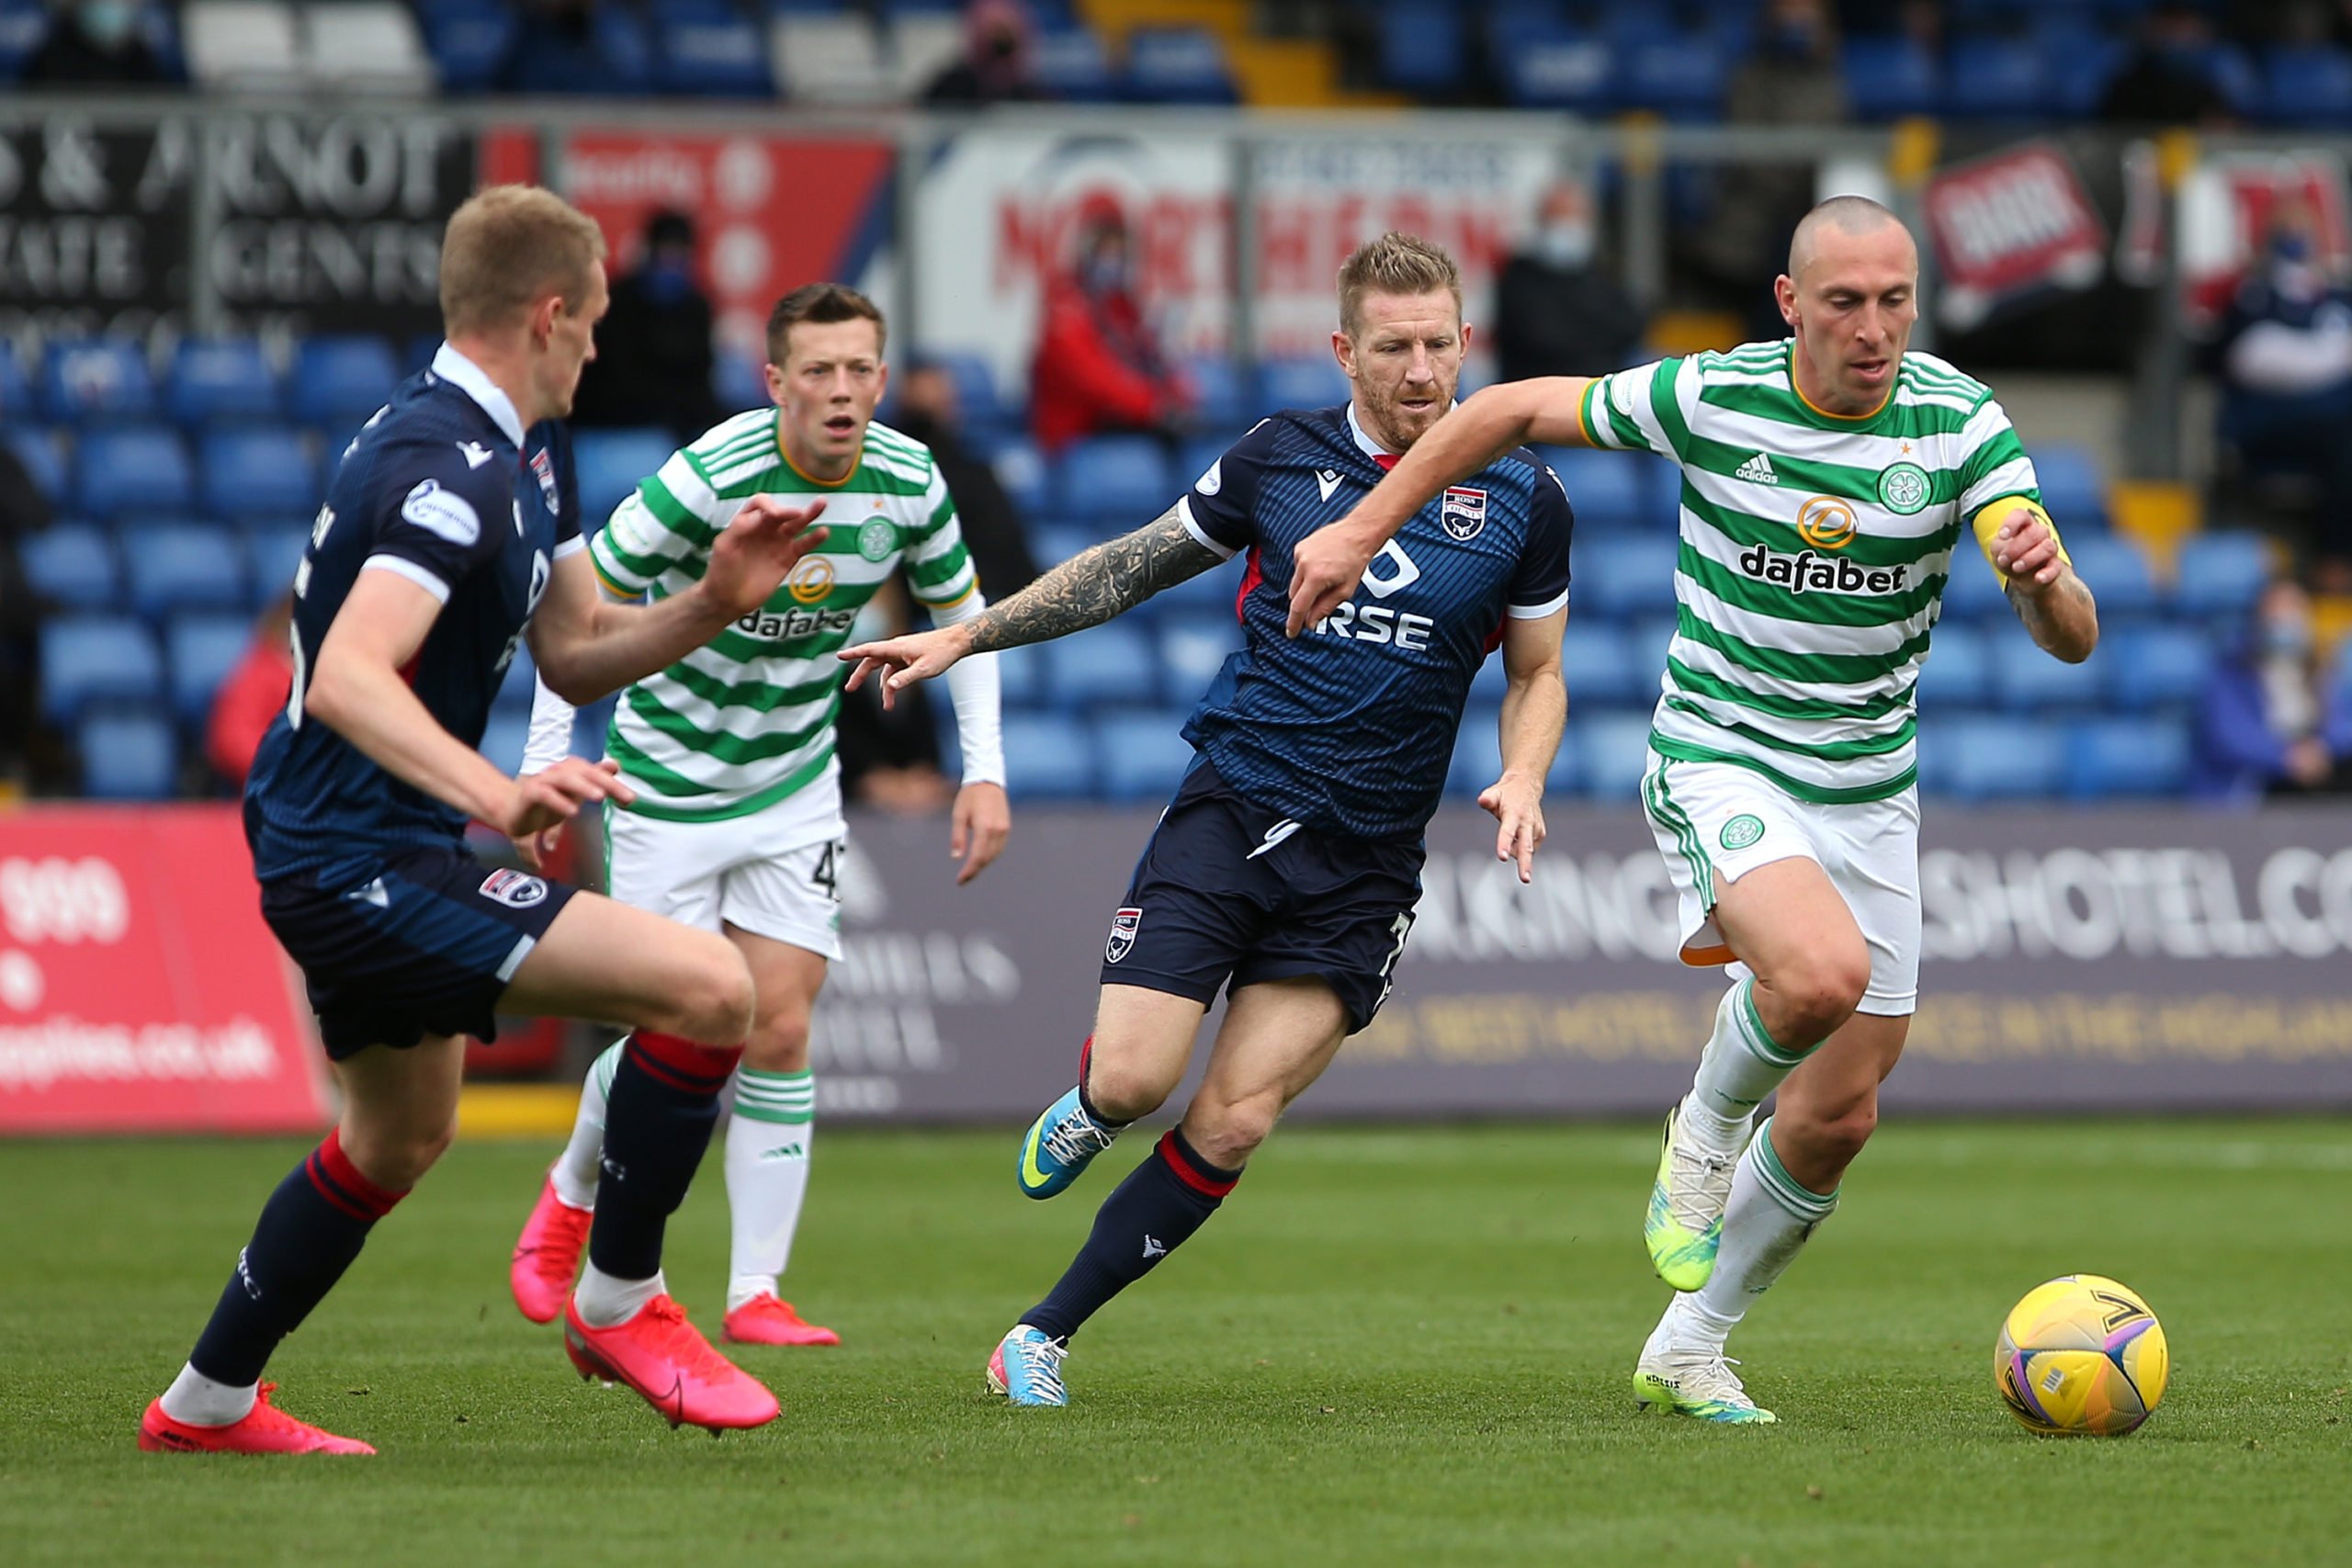 Ross County told to "have no fear"; former pro reckons Lennon's Celtic are there for the taking